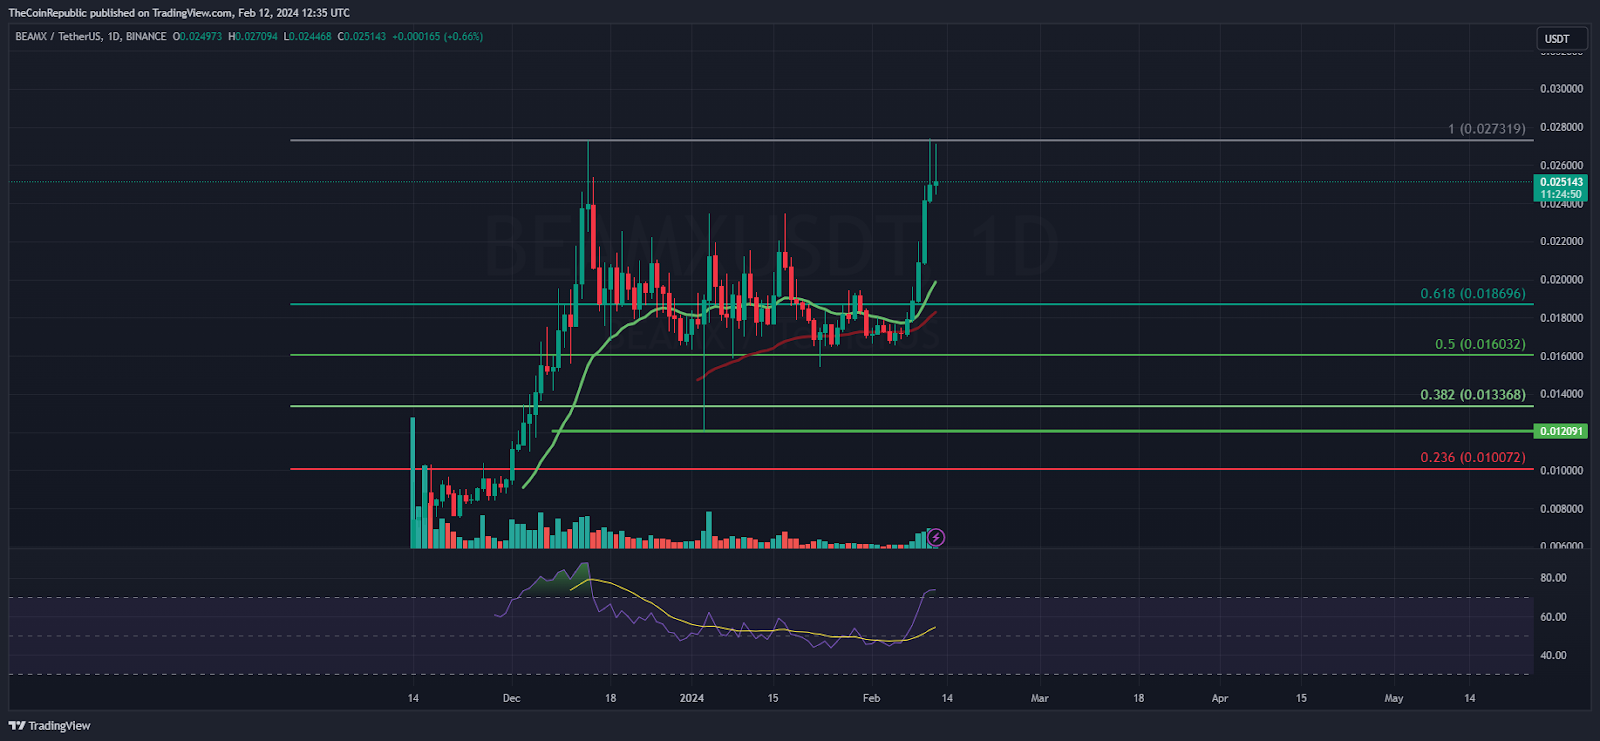 BEAM Price Prediction: Can BEAM Make a New High Above $0.02800?